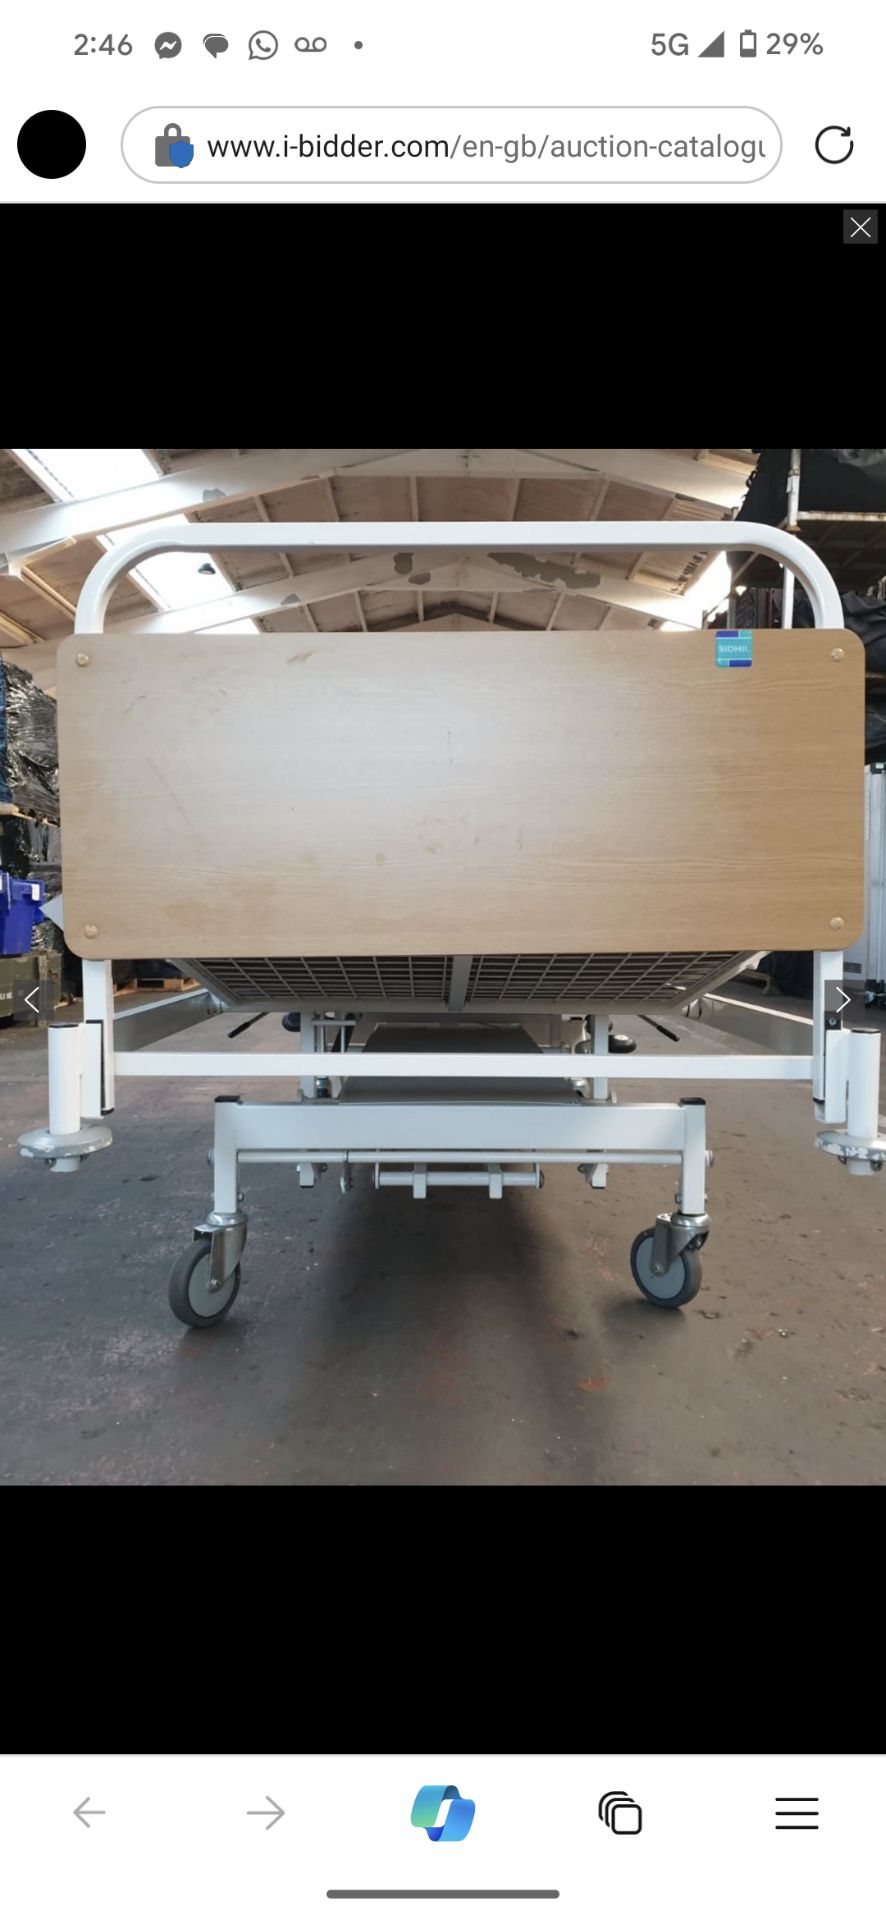 SIDHL 2 WAY TILT, HYDRAULIC LIFT HOSPITAL BED WITH MATTRESS RRP £1685 (NO VAT ON HAMMER) - Image 6 of 7